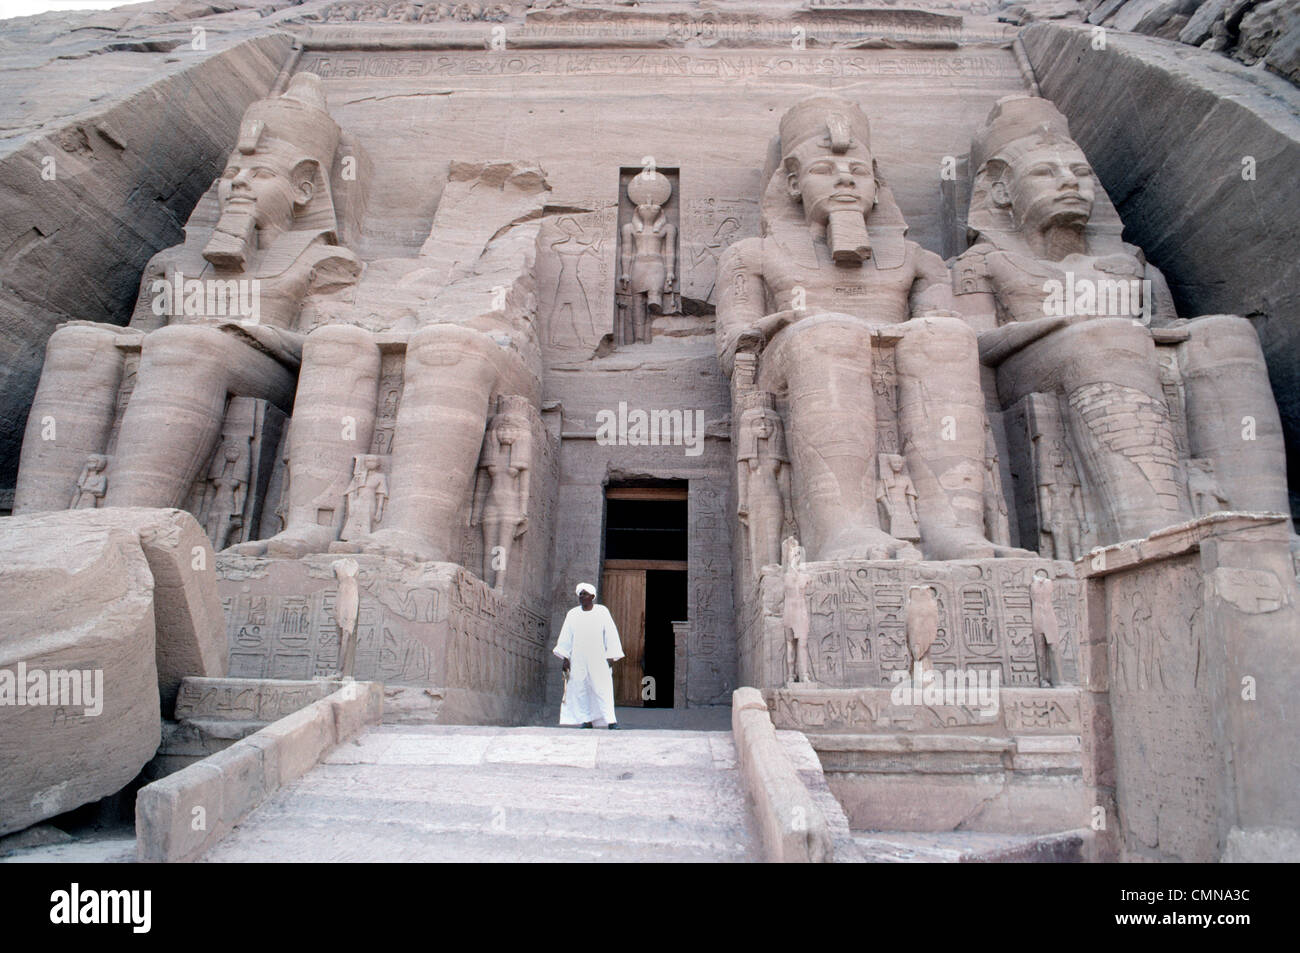 Four colossal statues of Ramesses II guard the entrance to his famous rock-cut temple at Abu Simbel built in Nubia, Egypt, to honor himself as pharaoh. Stock Photo